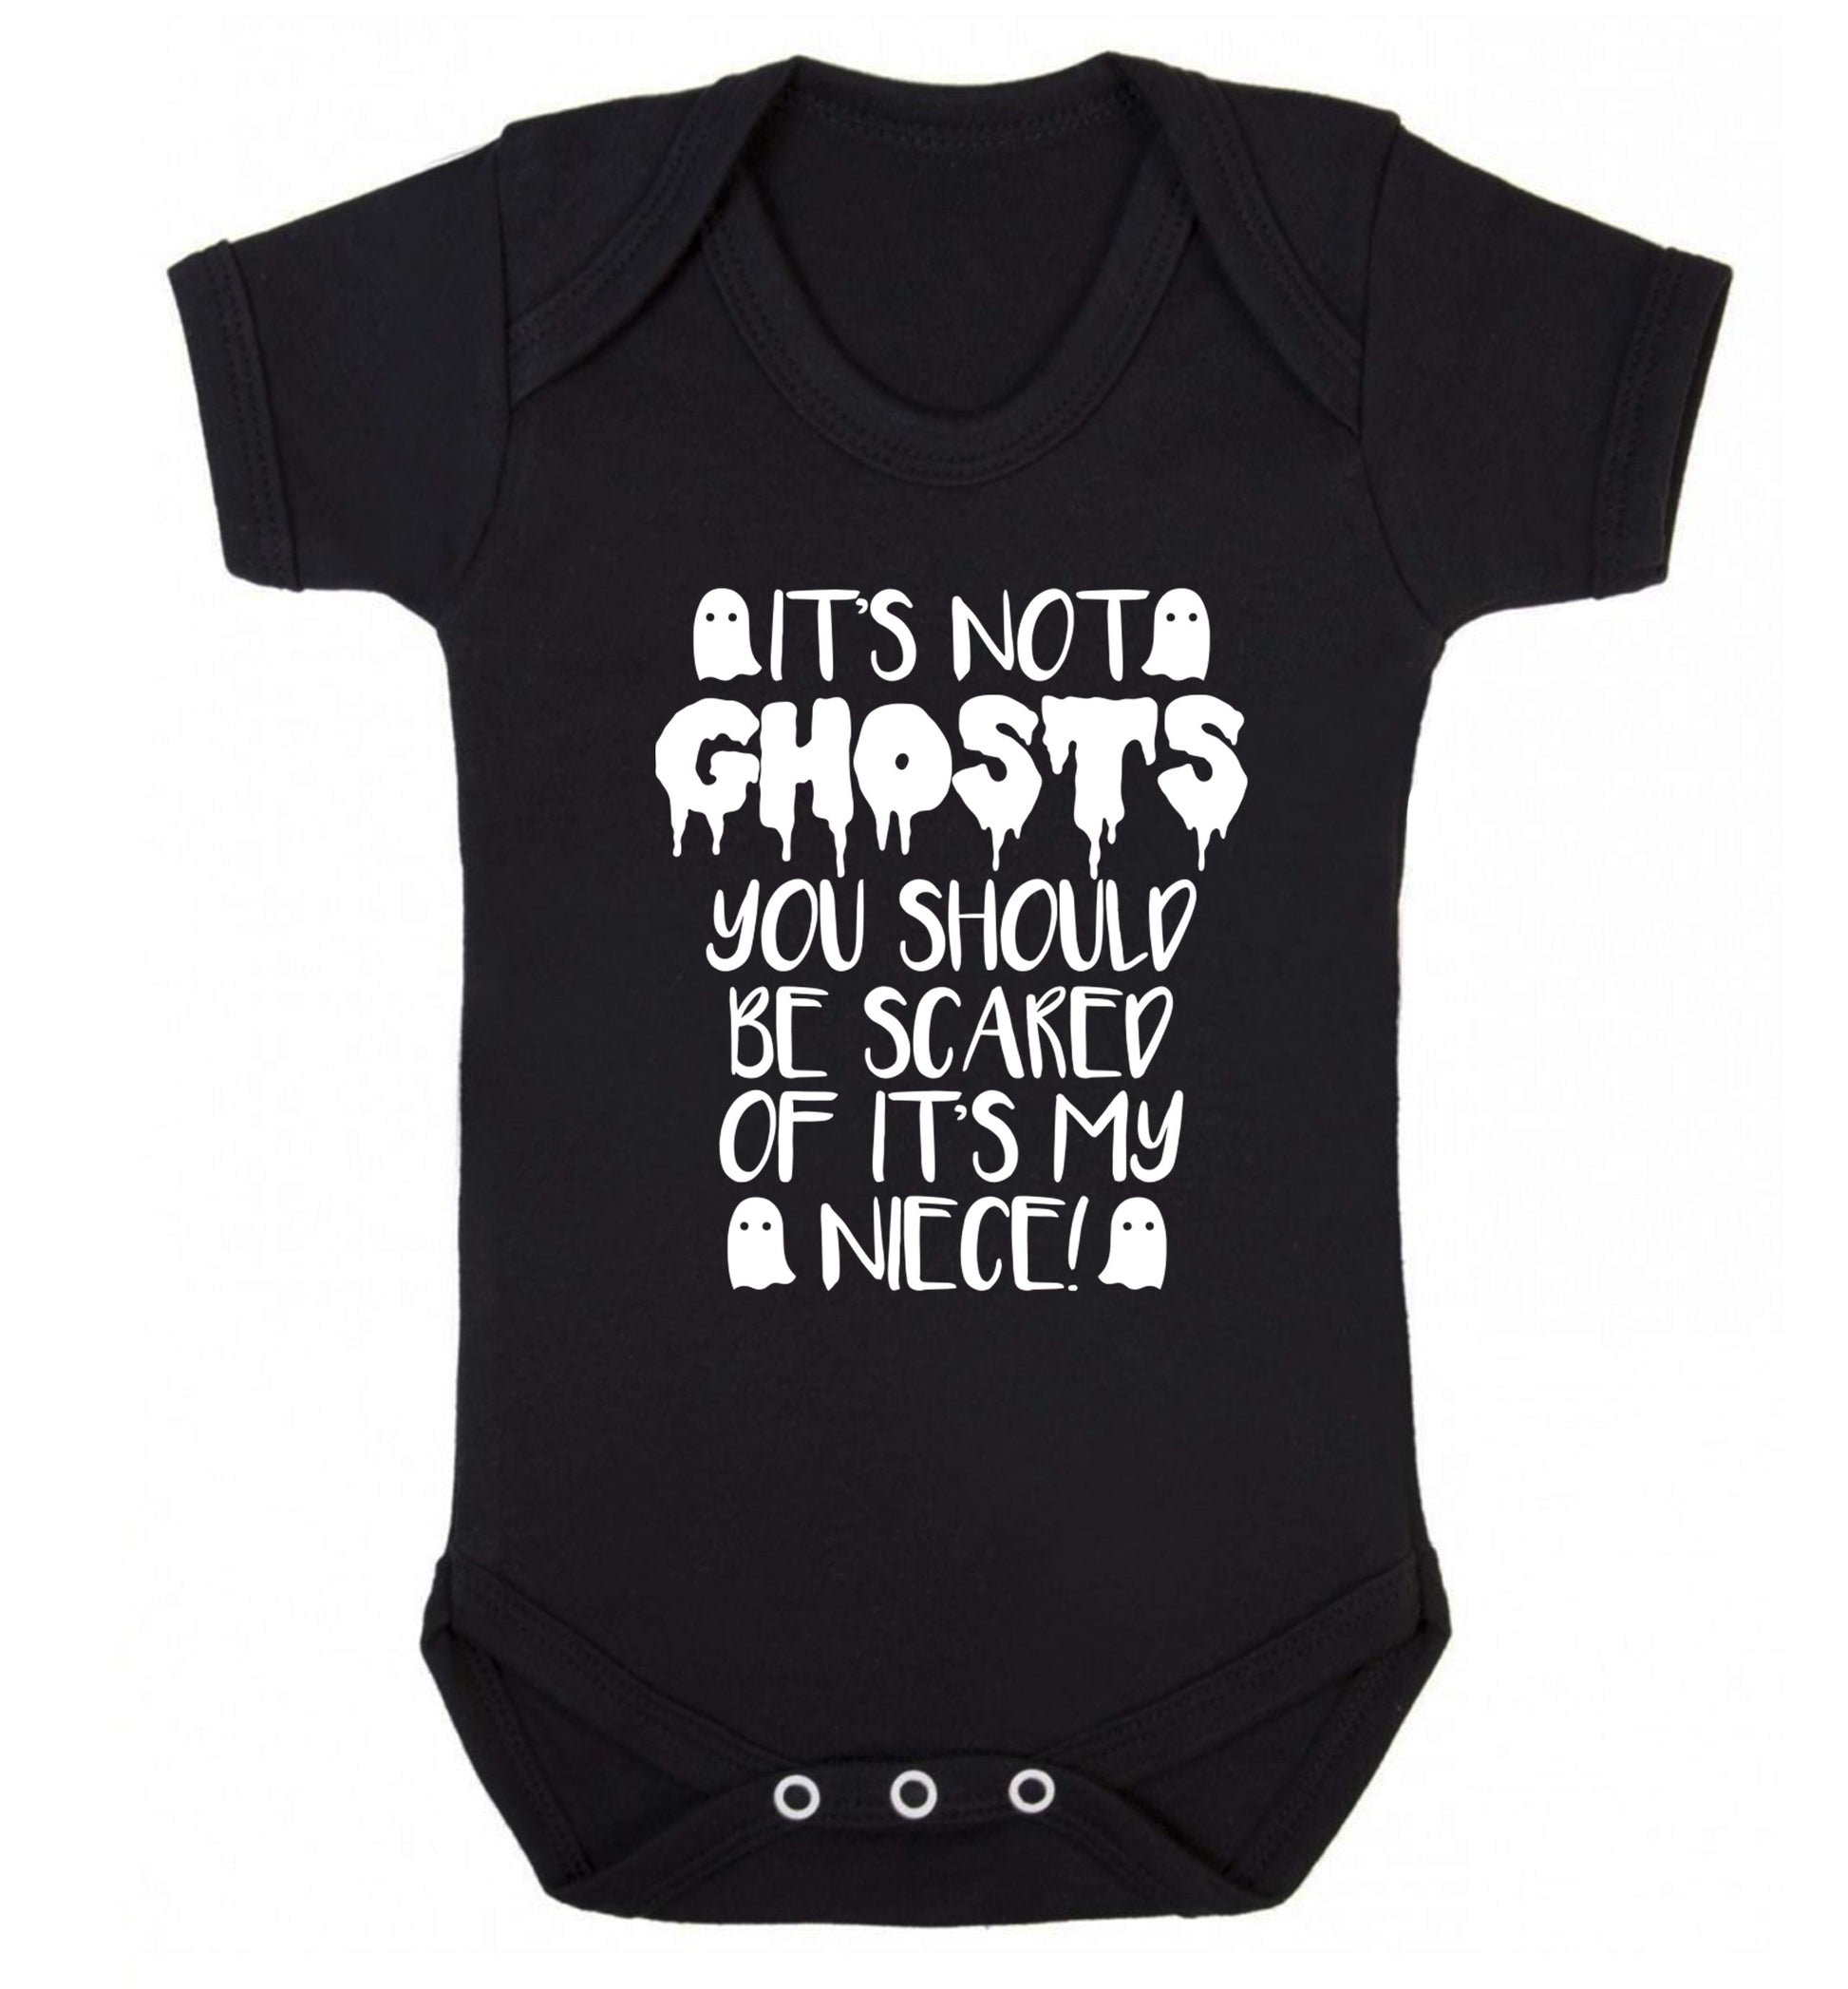 It's not ghosts you should be scared of it's my niece! Baby Vest black 18-24 months